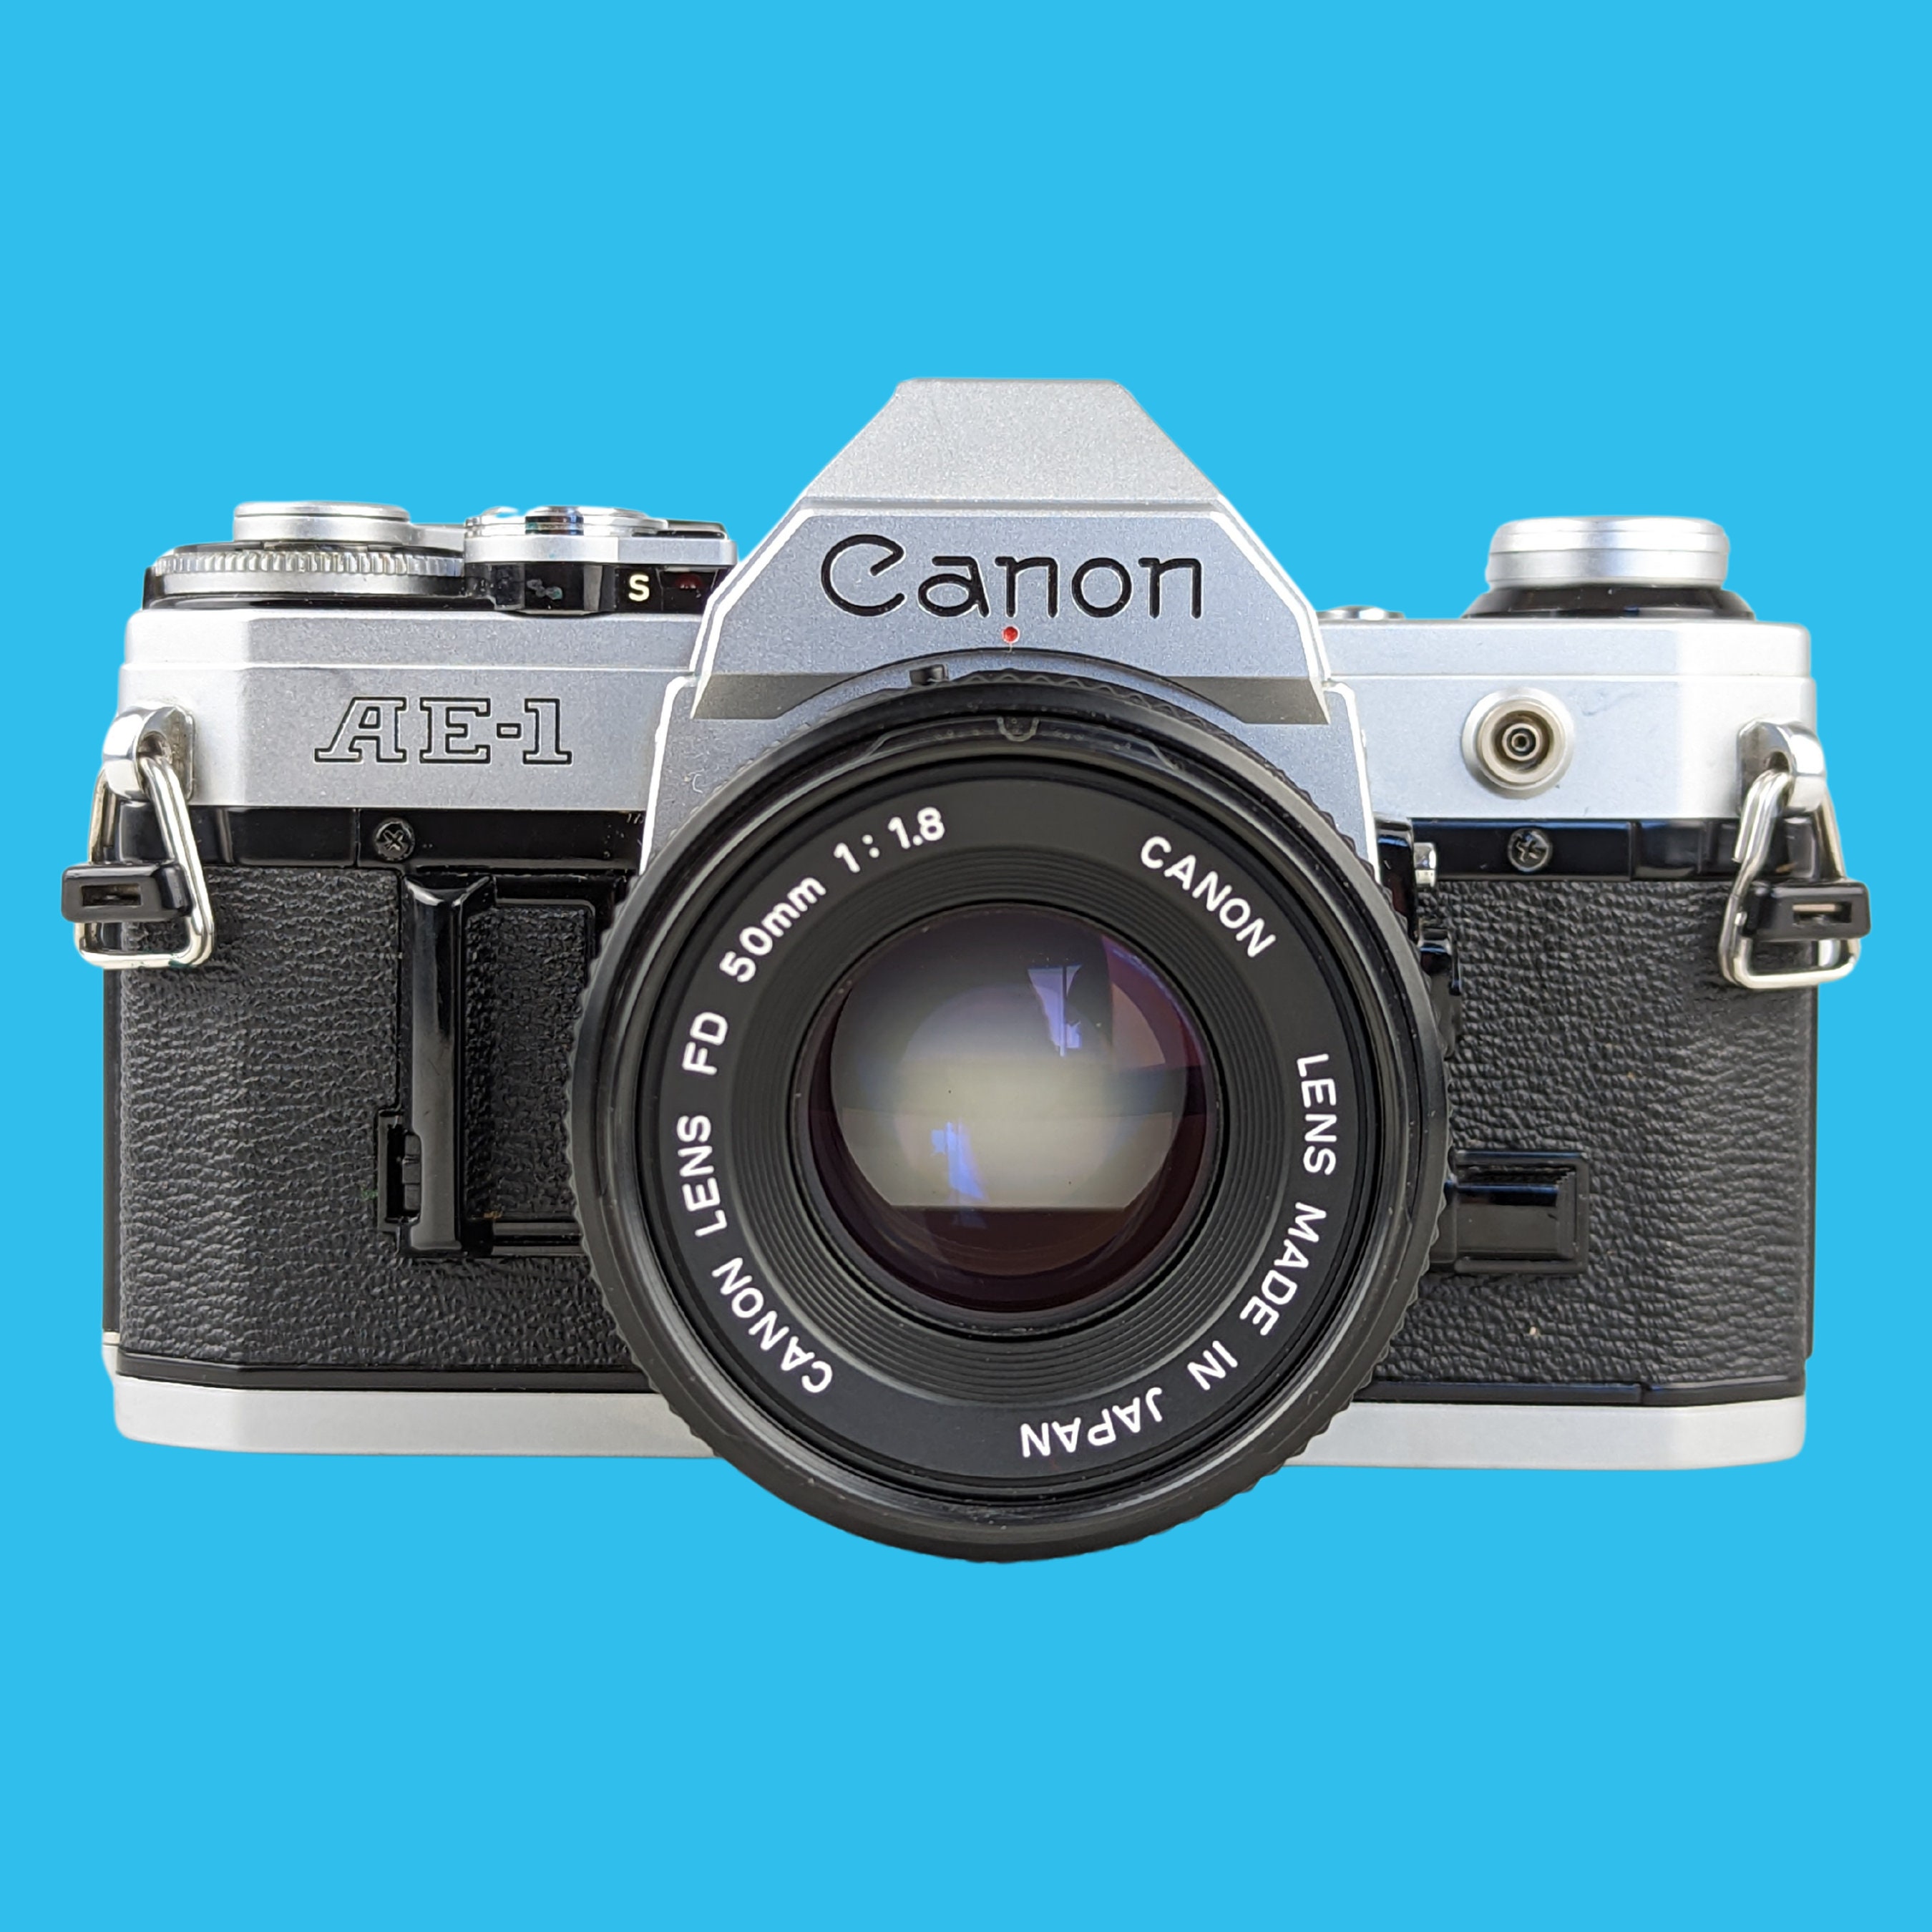 Canon AE-1 35mm SLR Film Camera with Canon Prime Lens - Etsy 日本